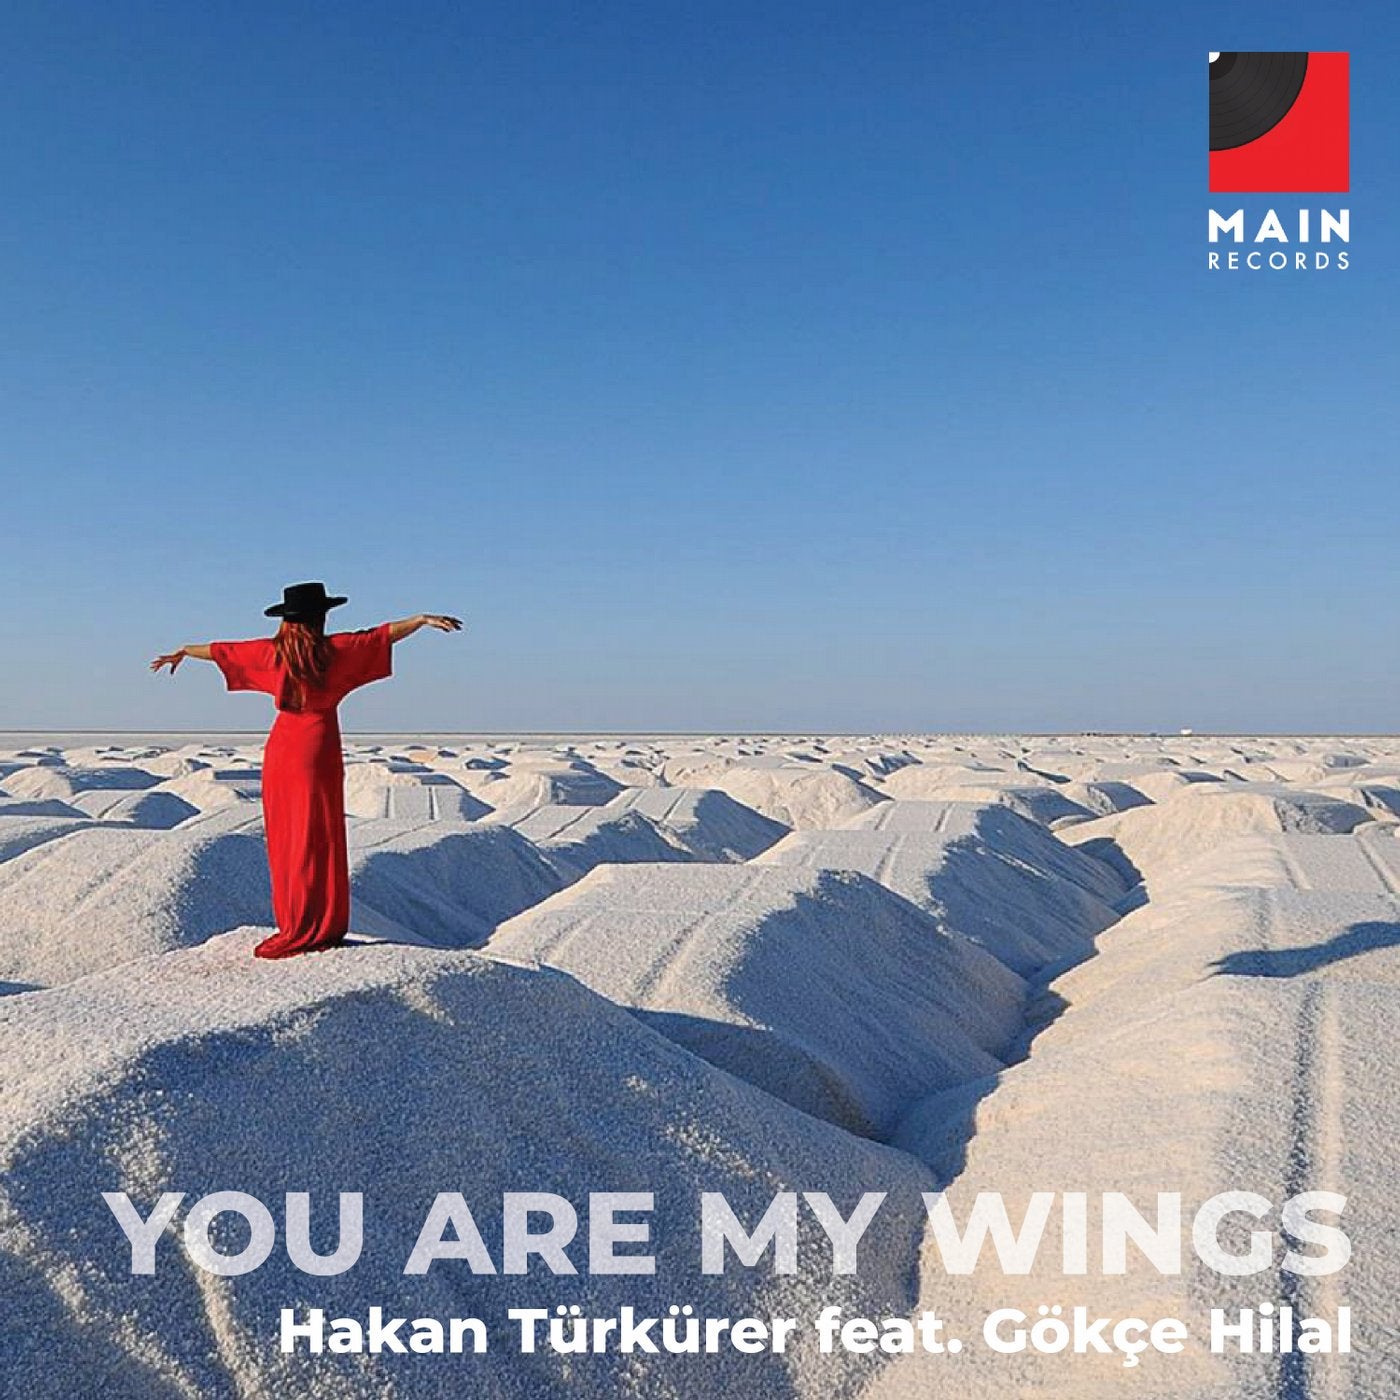 You are my wings (feat. Gökçe Hilal)